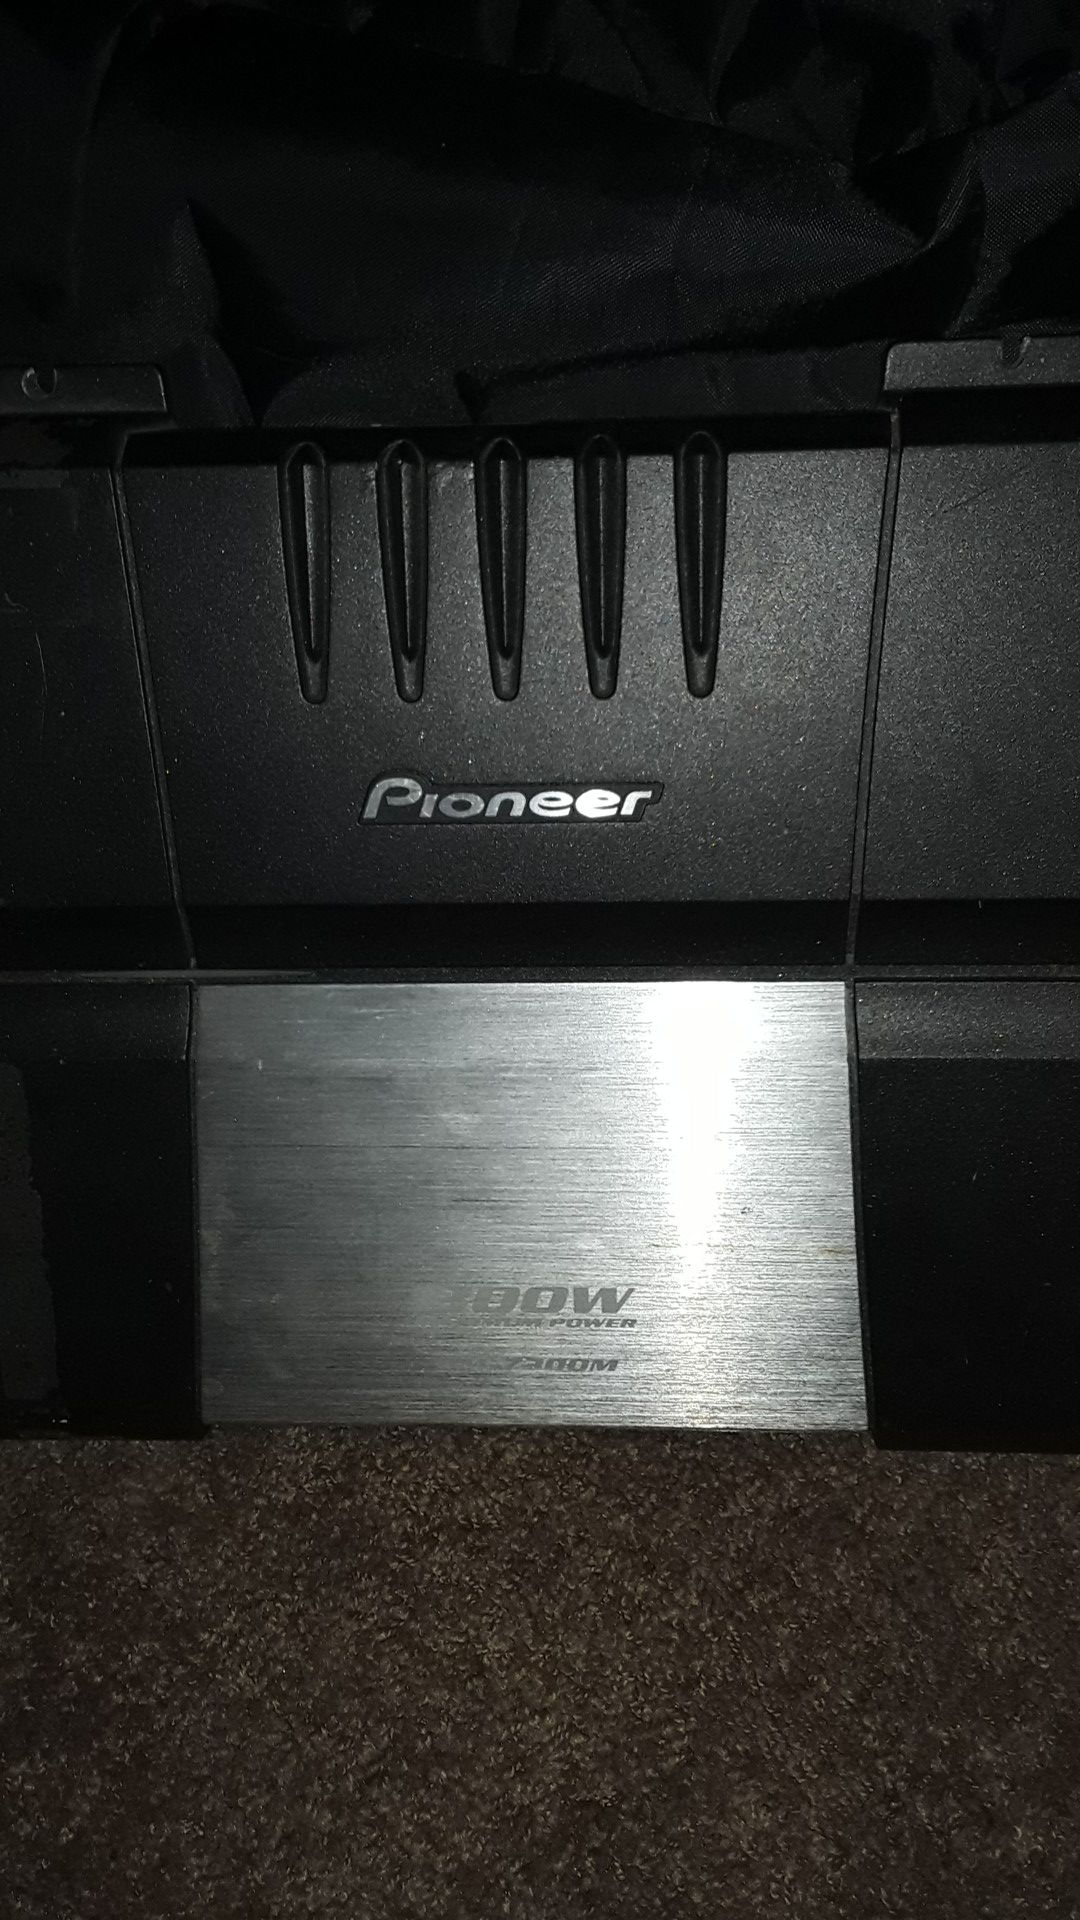 I got a pioneer 800w one channel and a boss 1 channel 1500 watt asking 65 for the pioneer 55 for the boss or best offer